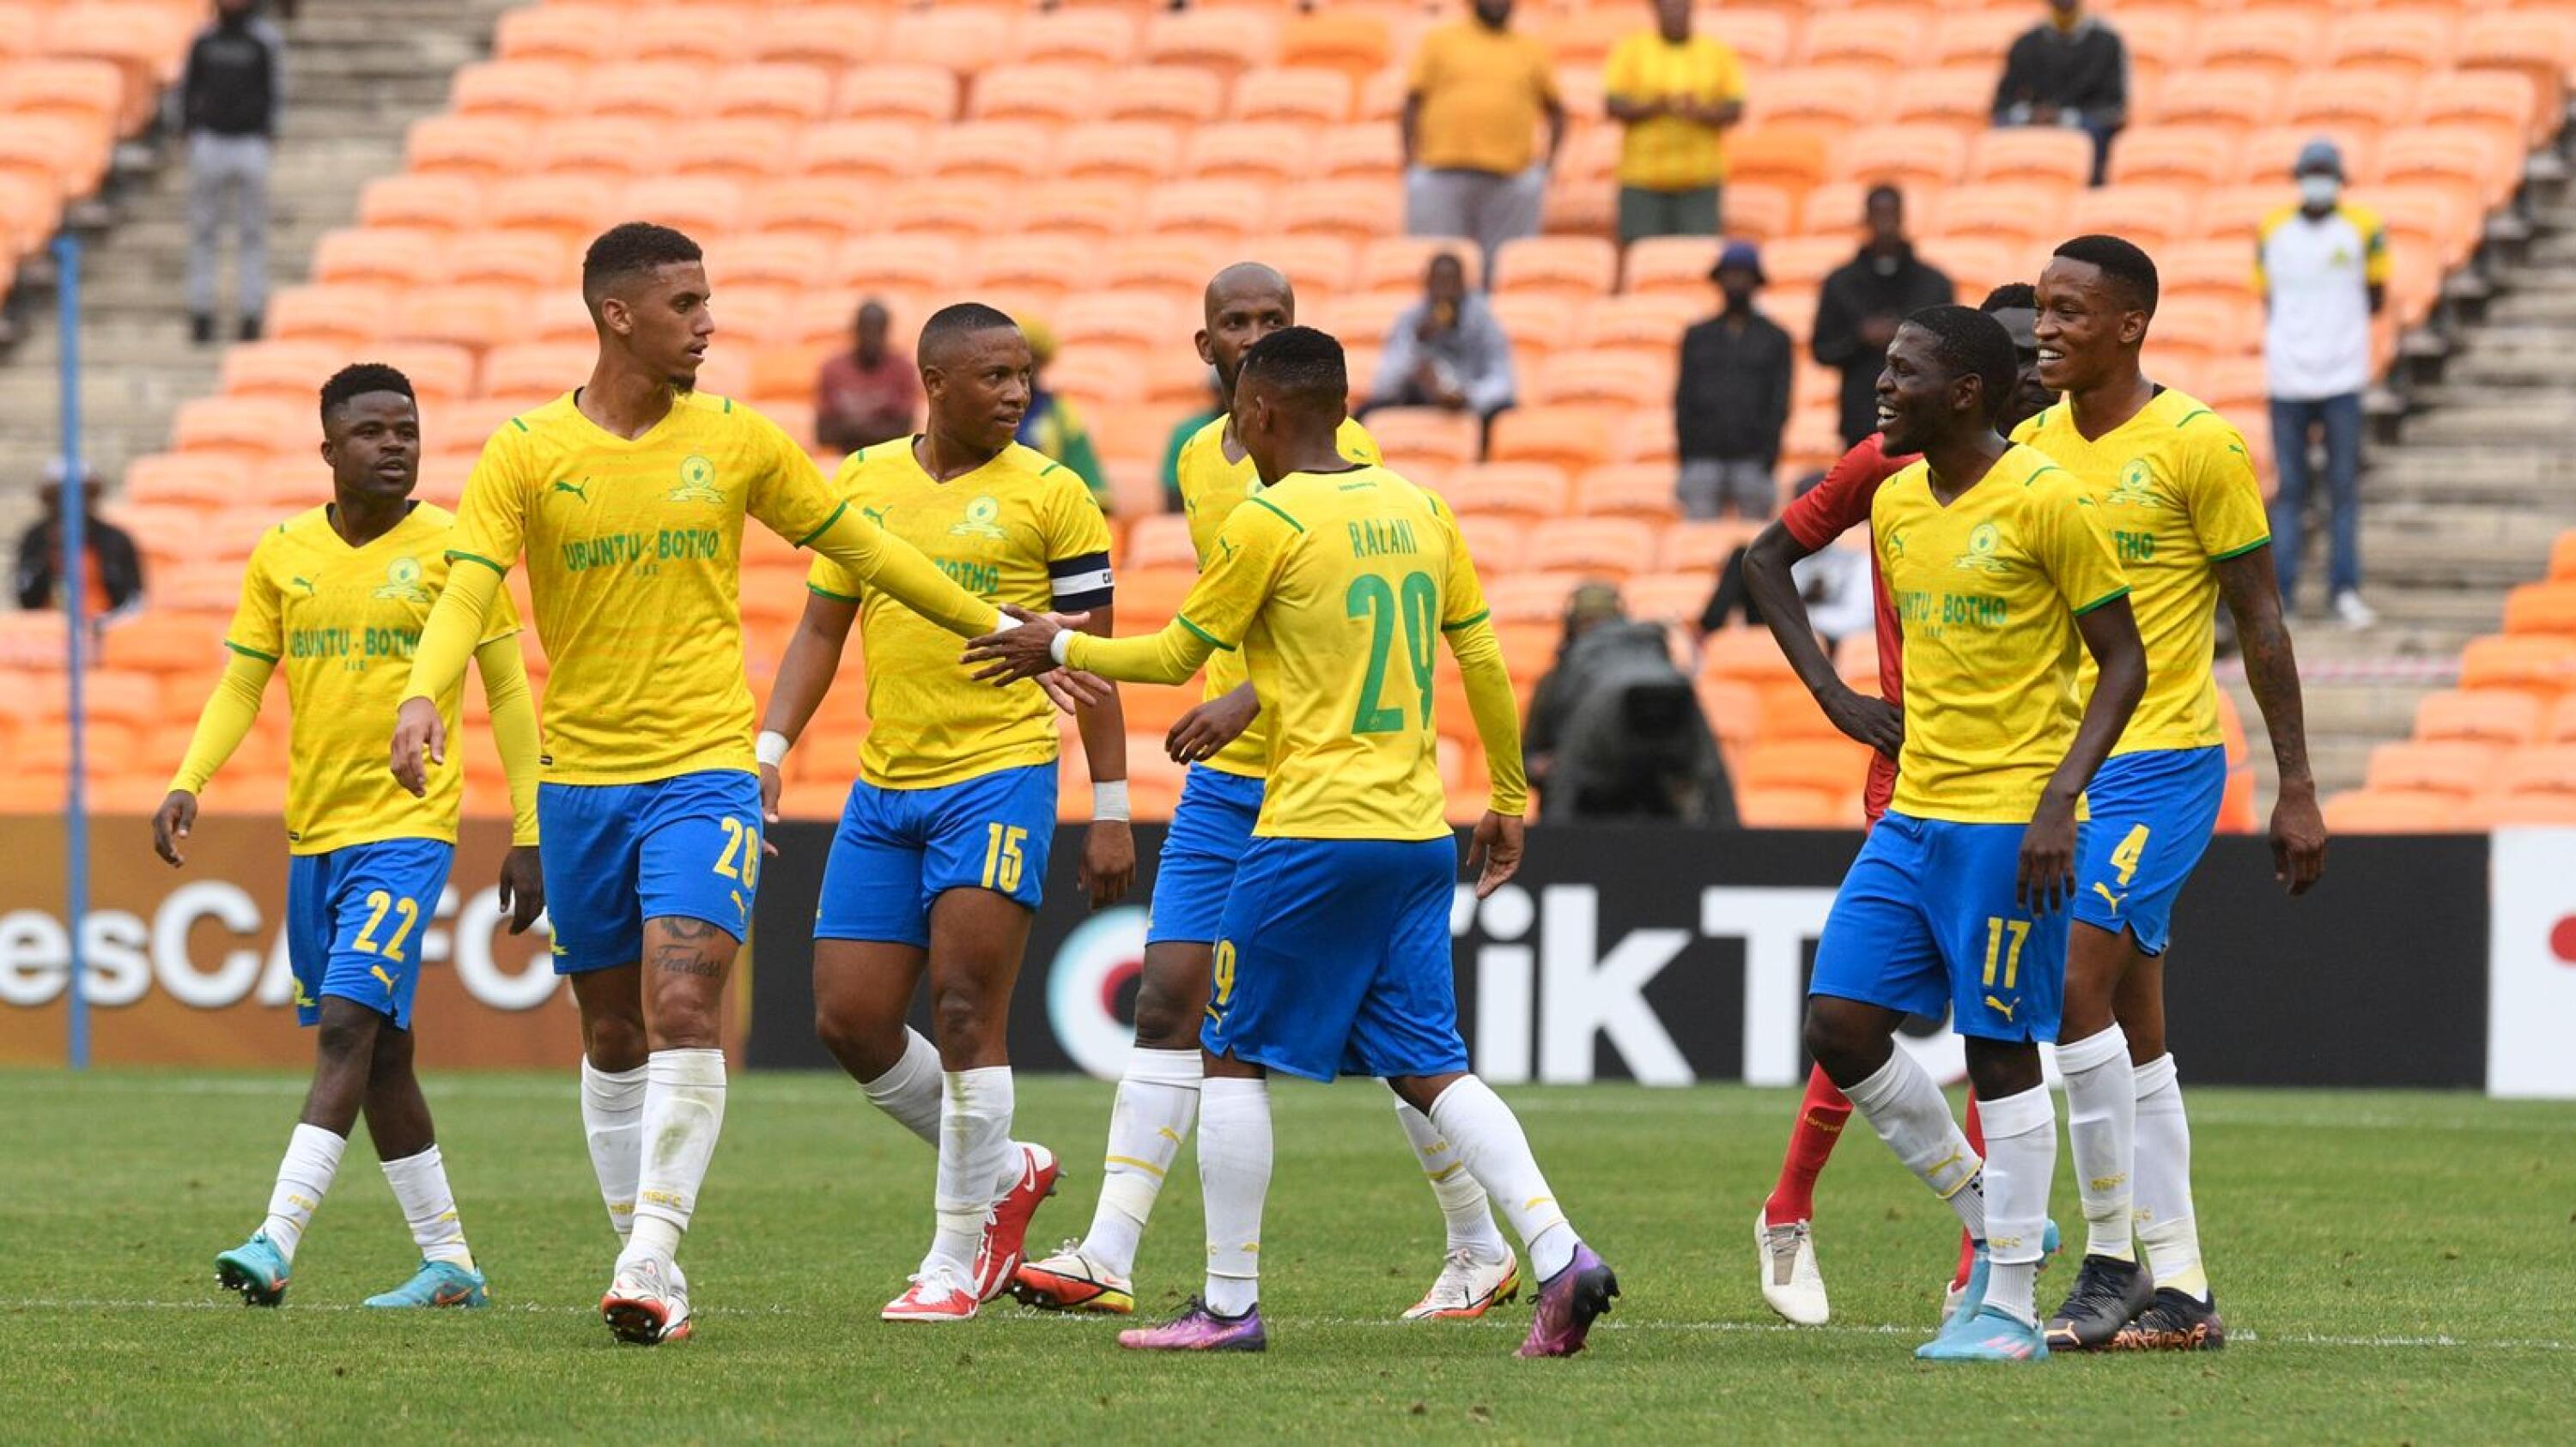 Surprise Ralani of Mamelodi Sundowns celebrates with teammates after scoring during their CAF Champions League match against Al Merrikh at FNB Stadium in Johannesburg on Saturday